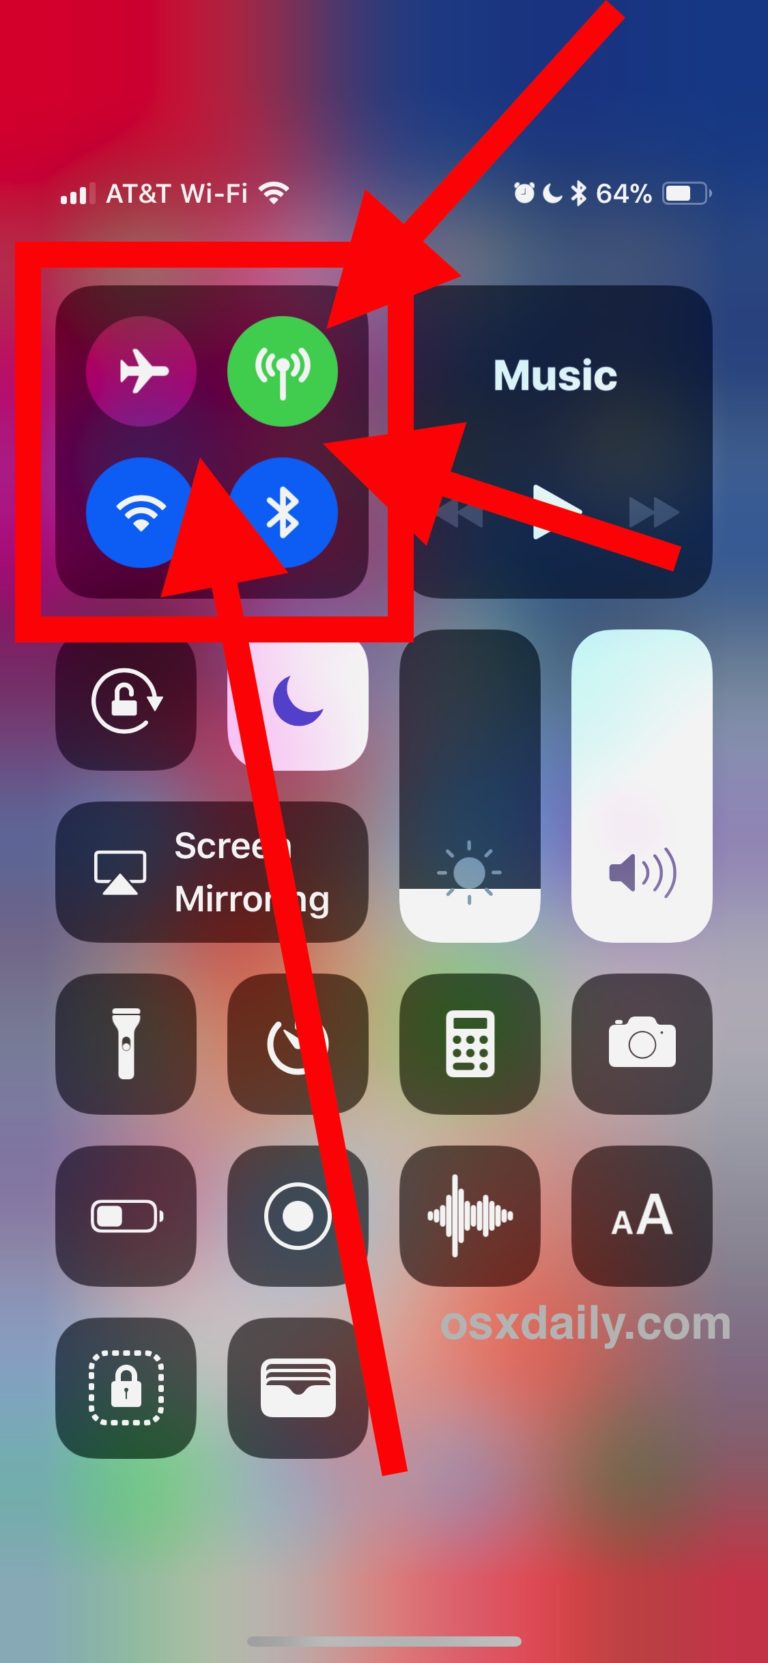 How to Access AirDrop on iOS 13 Control Center